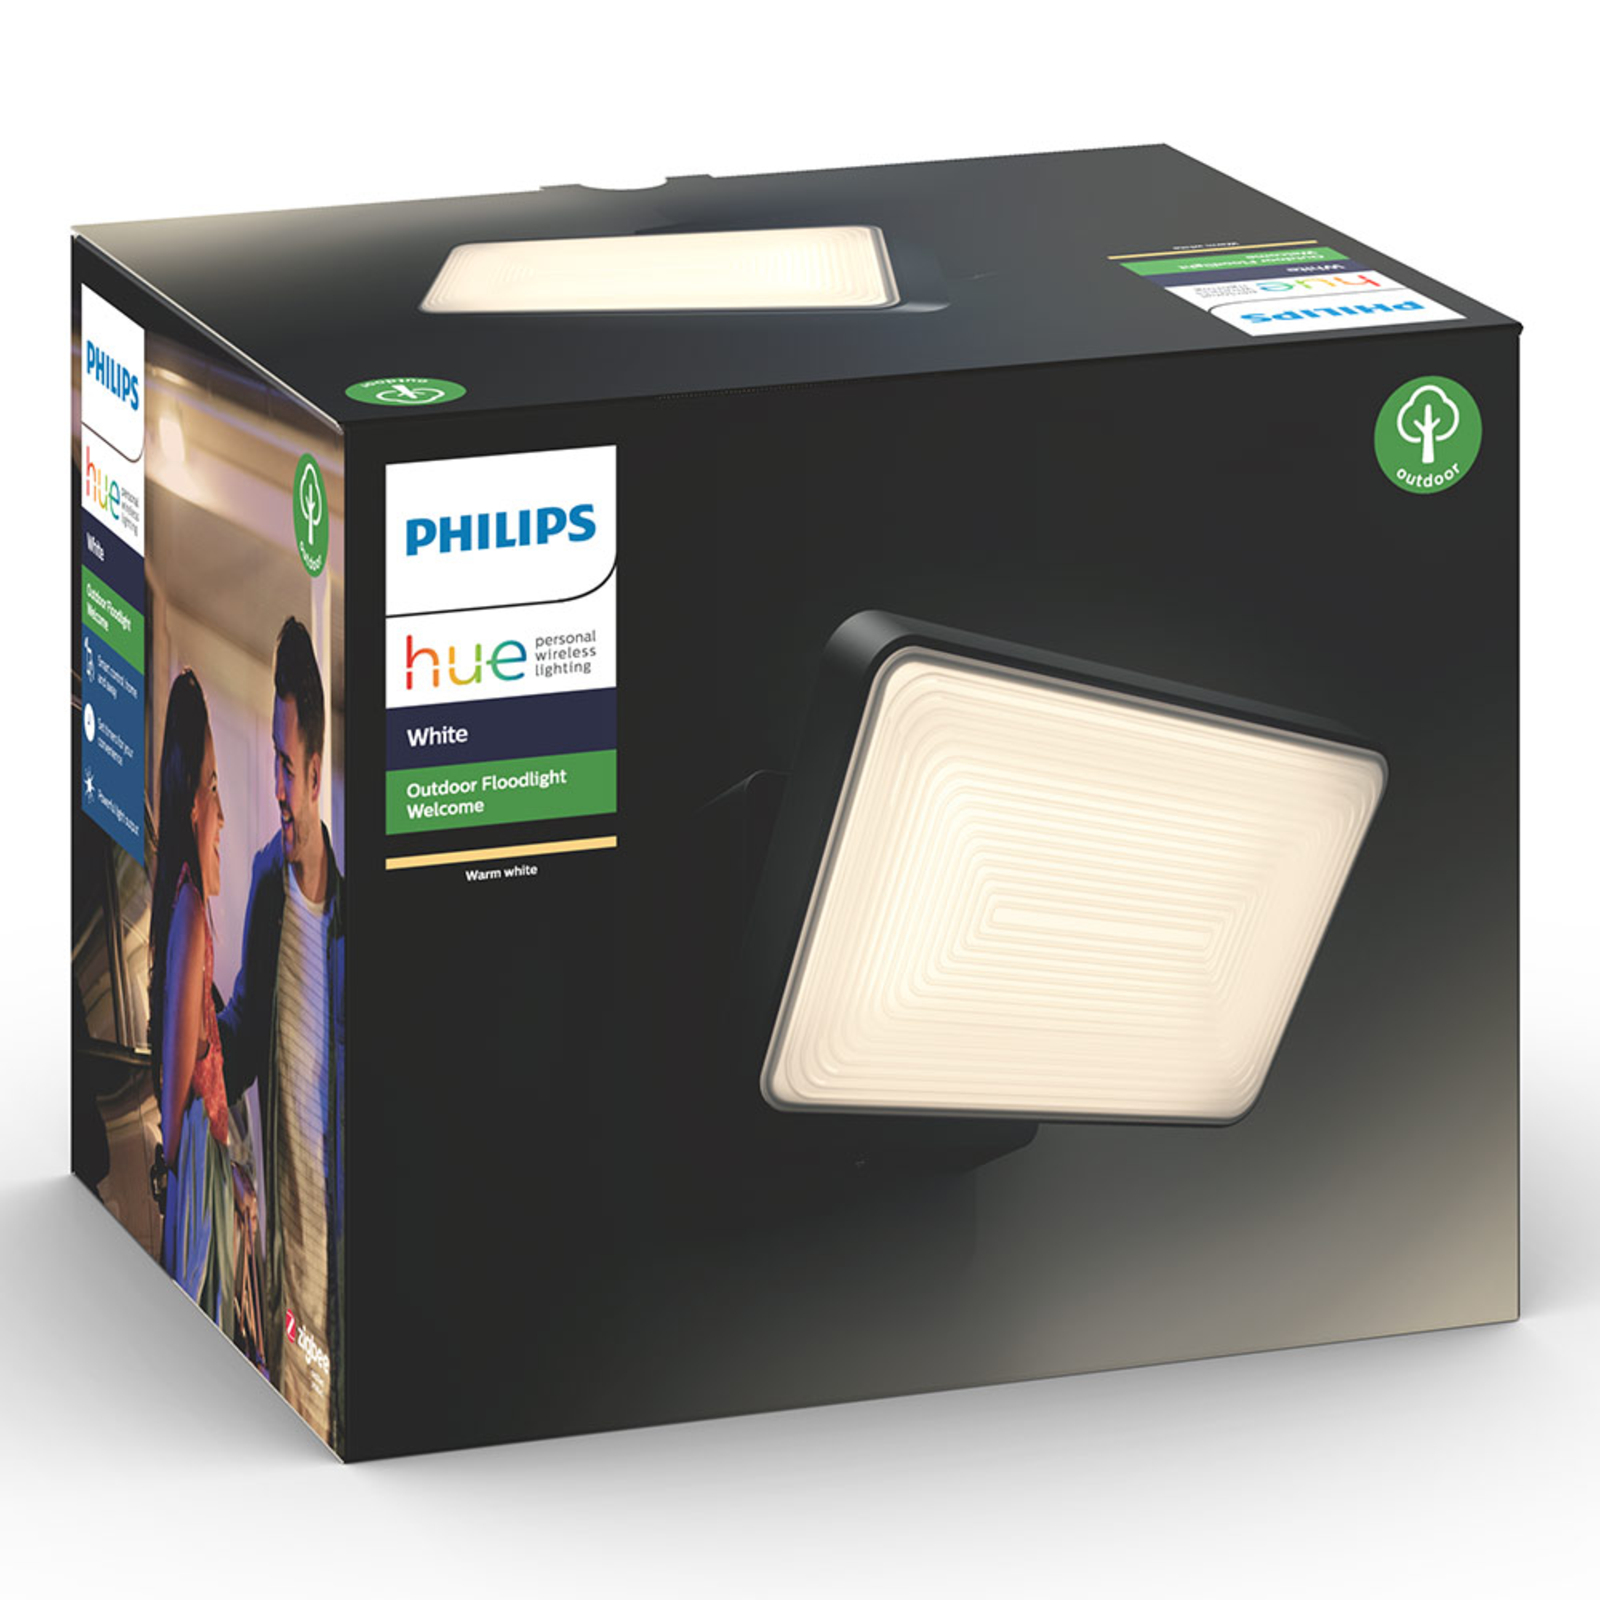 Philips Hue White Welcome buitenspot, 2.300lm